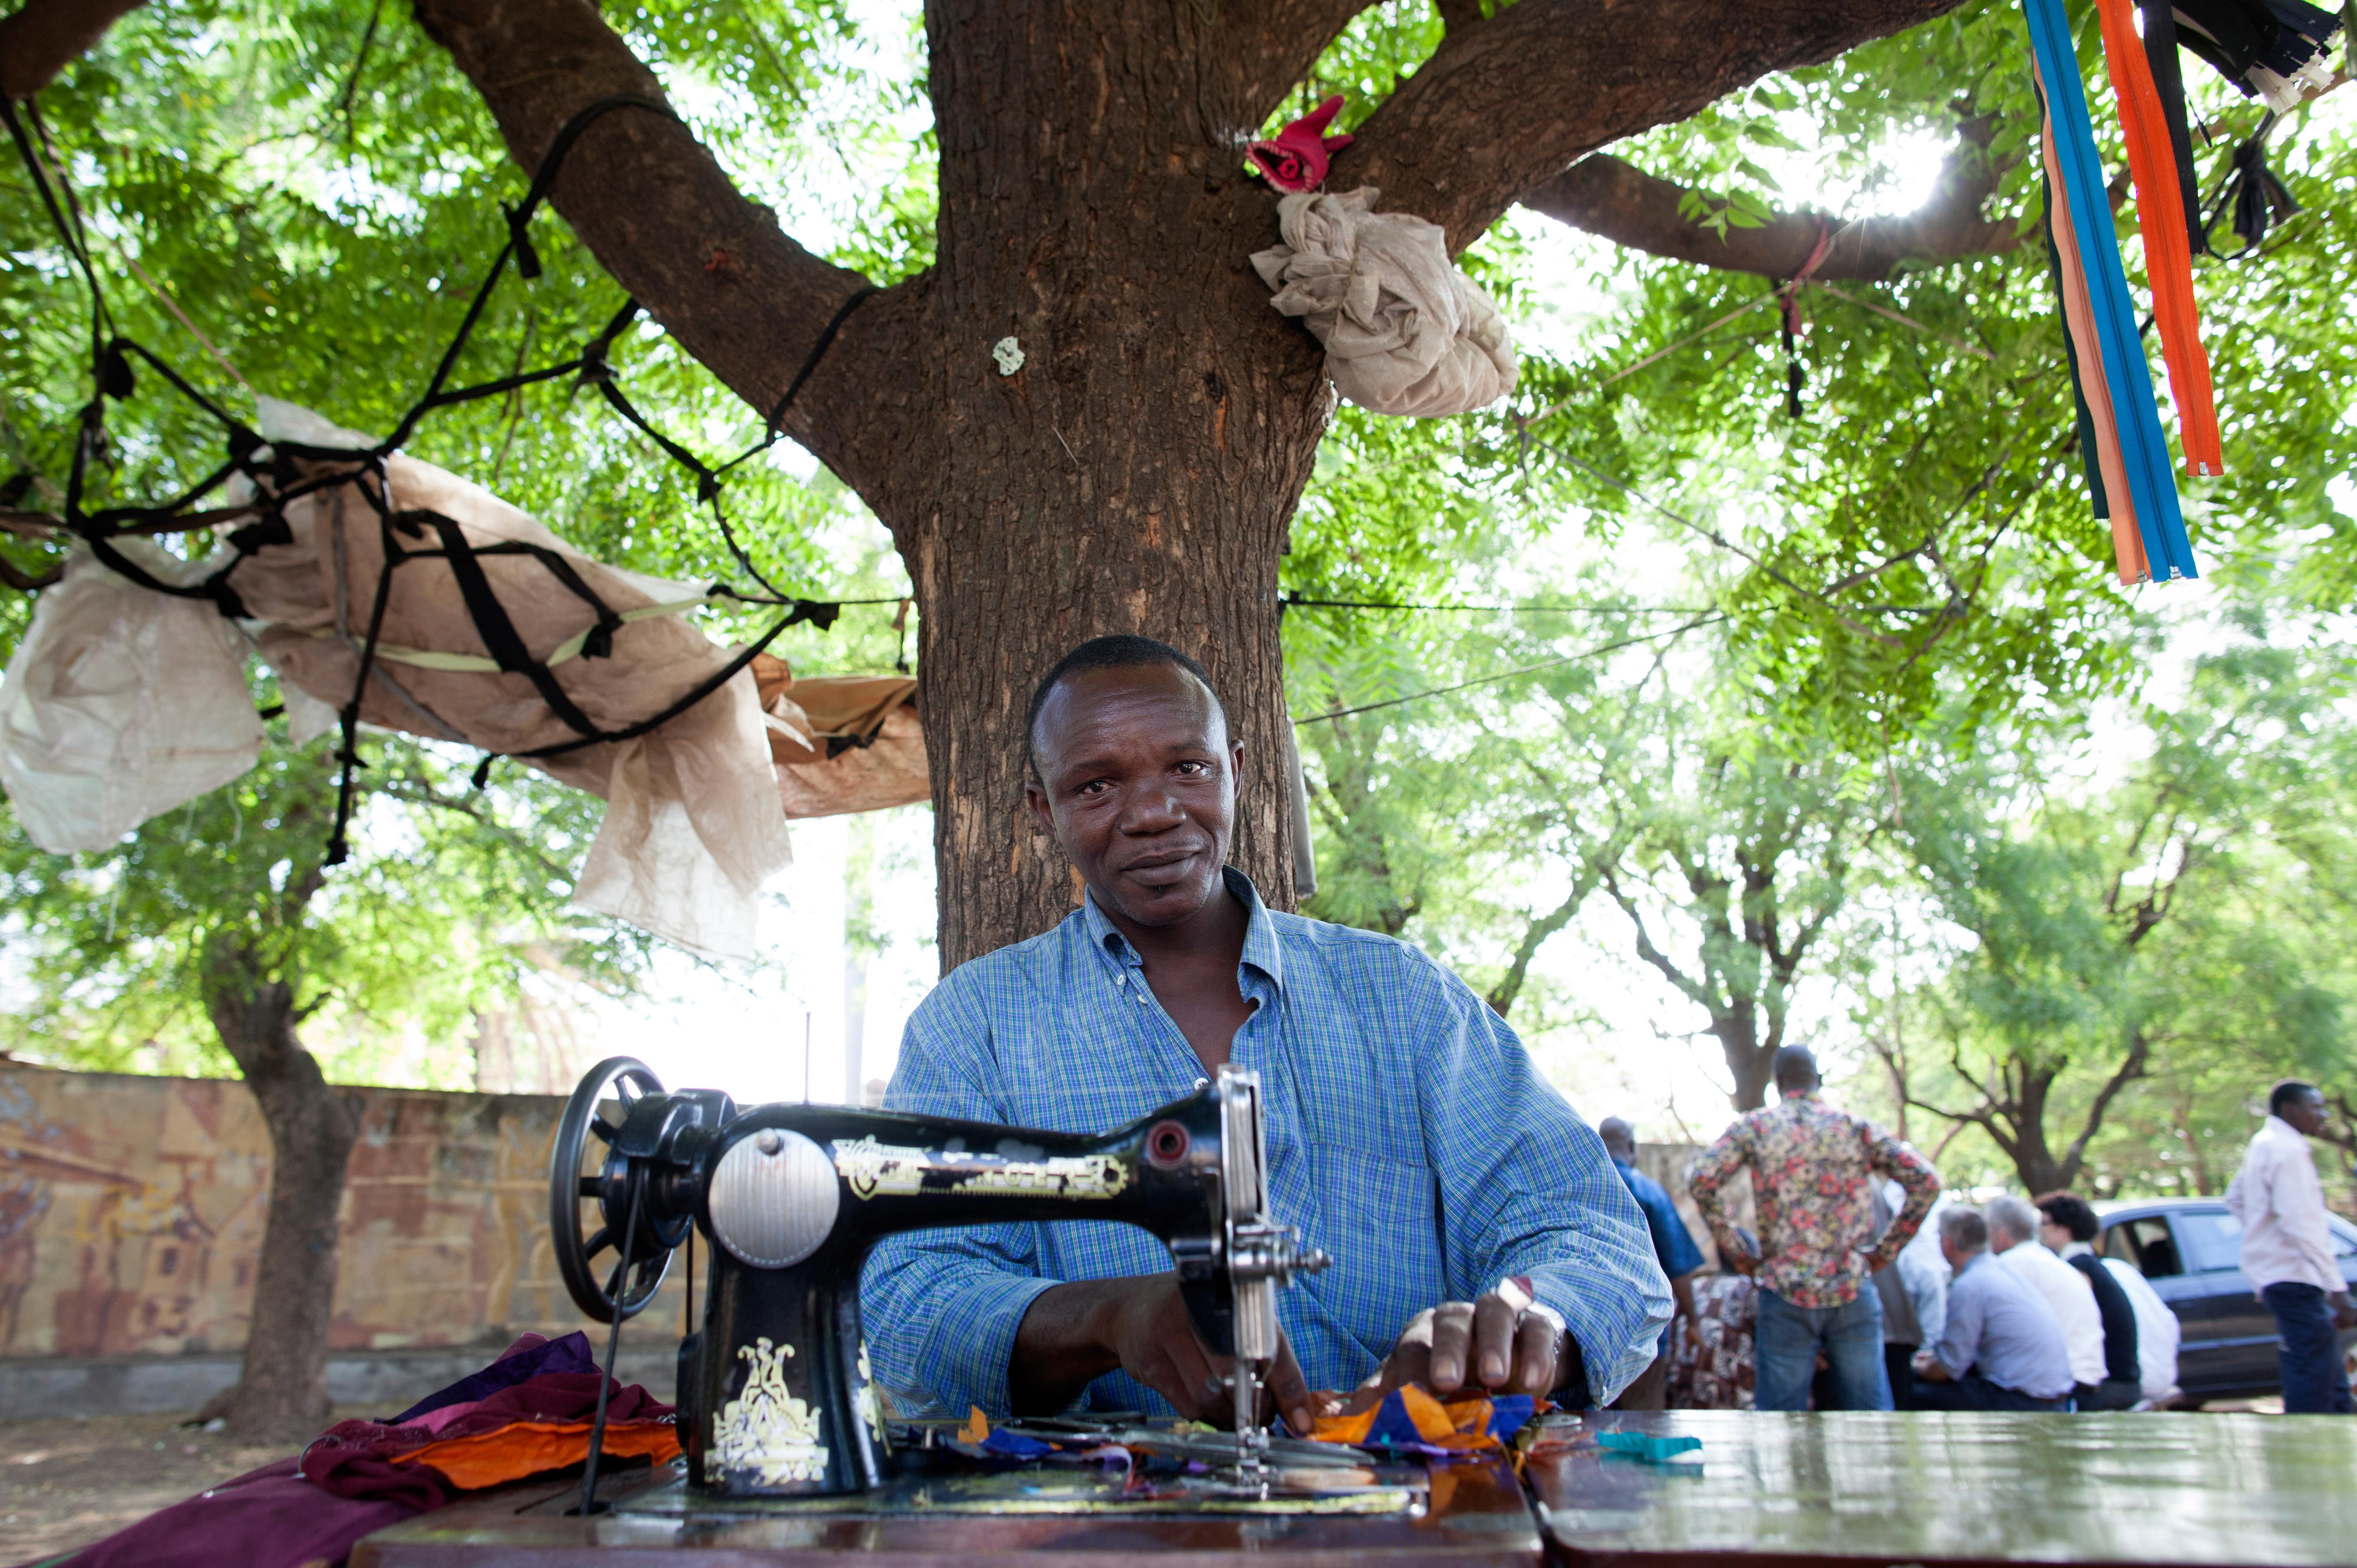 Tailor with his sewing machine on a street in Bamako, Mali